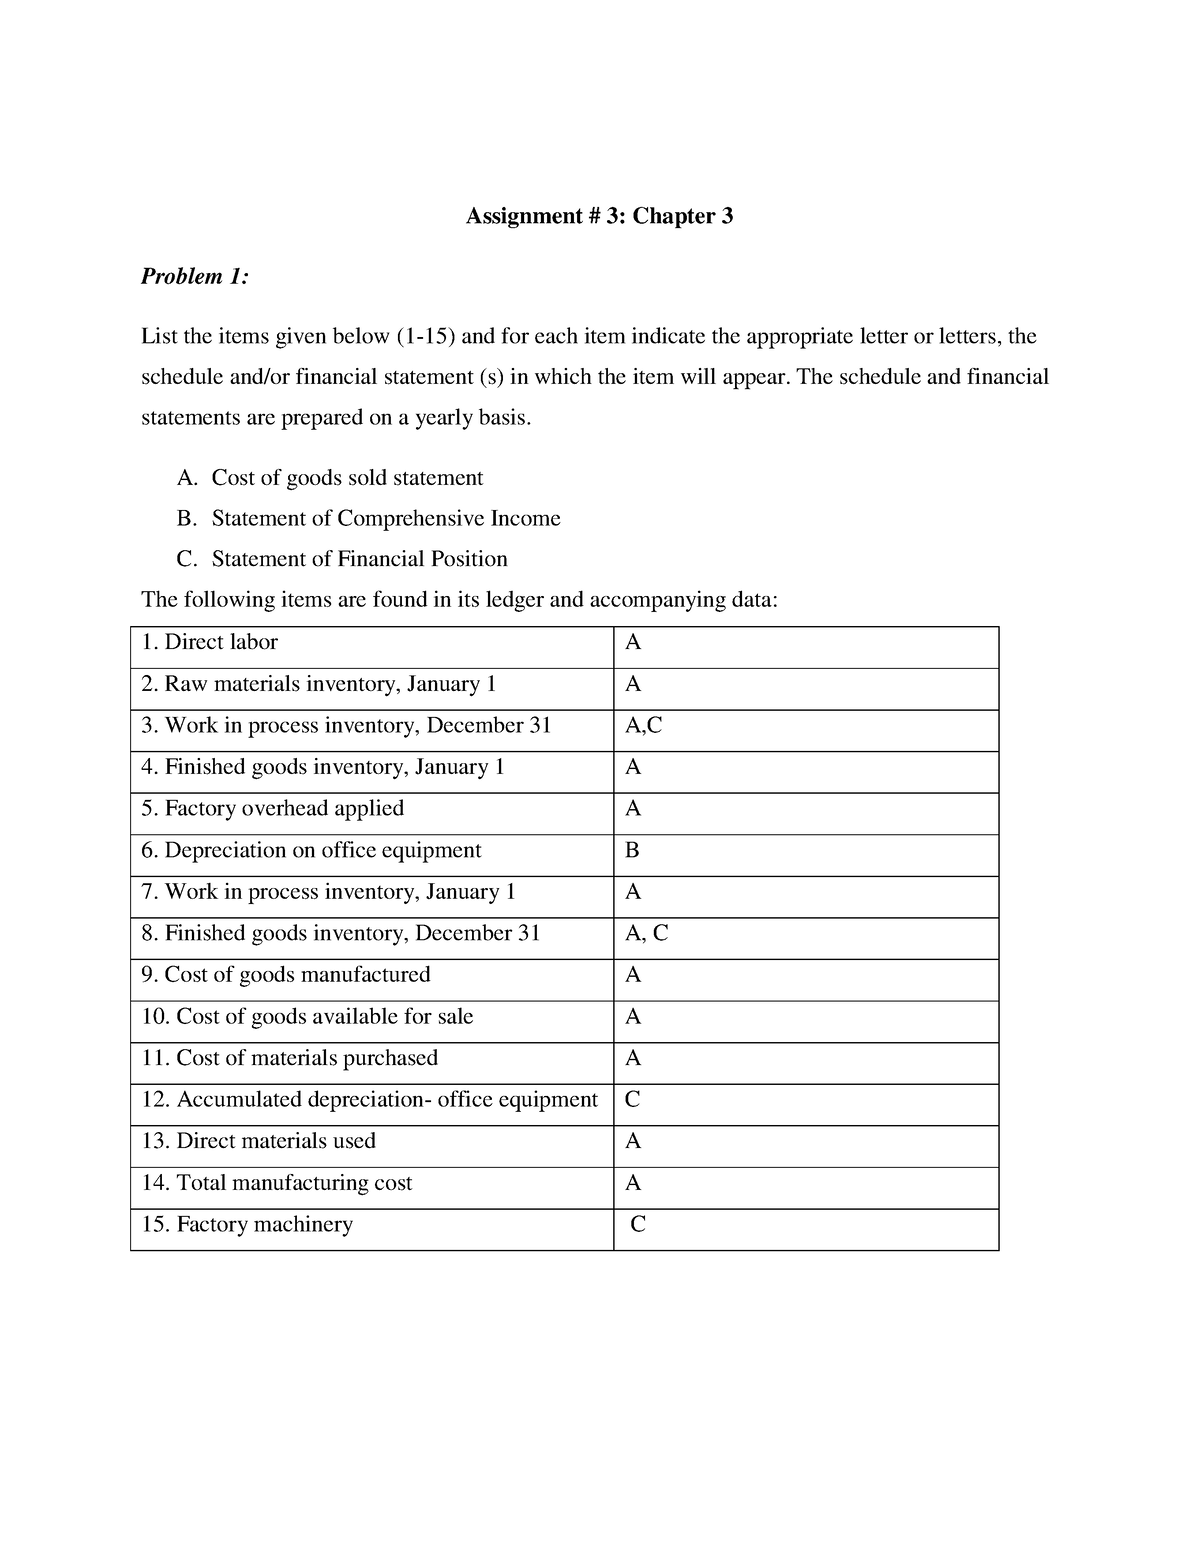 assignment chapter 3 quiz